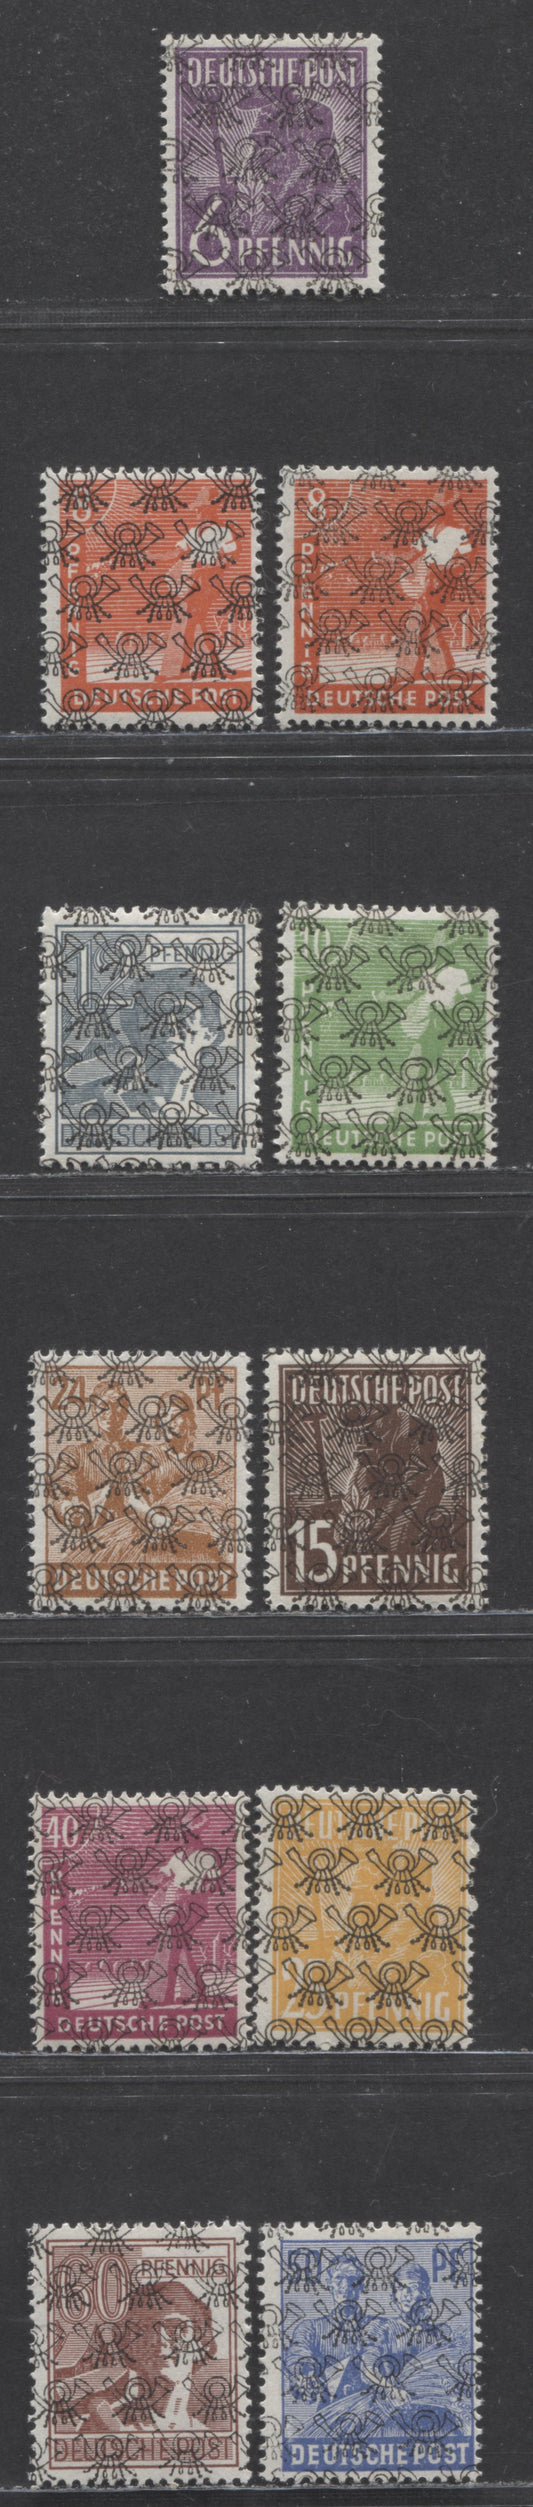 Lot 268 Germany - American and British Zone MI#36IIa (617)/A49II (631) 1947-1948 Pictorial Issue With Network Posthorn Overprint, 11 F/VFOG and NH Singles Including Additional Shades, Smooth Gum, 2023 Michel Cat. €16.40